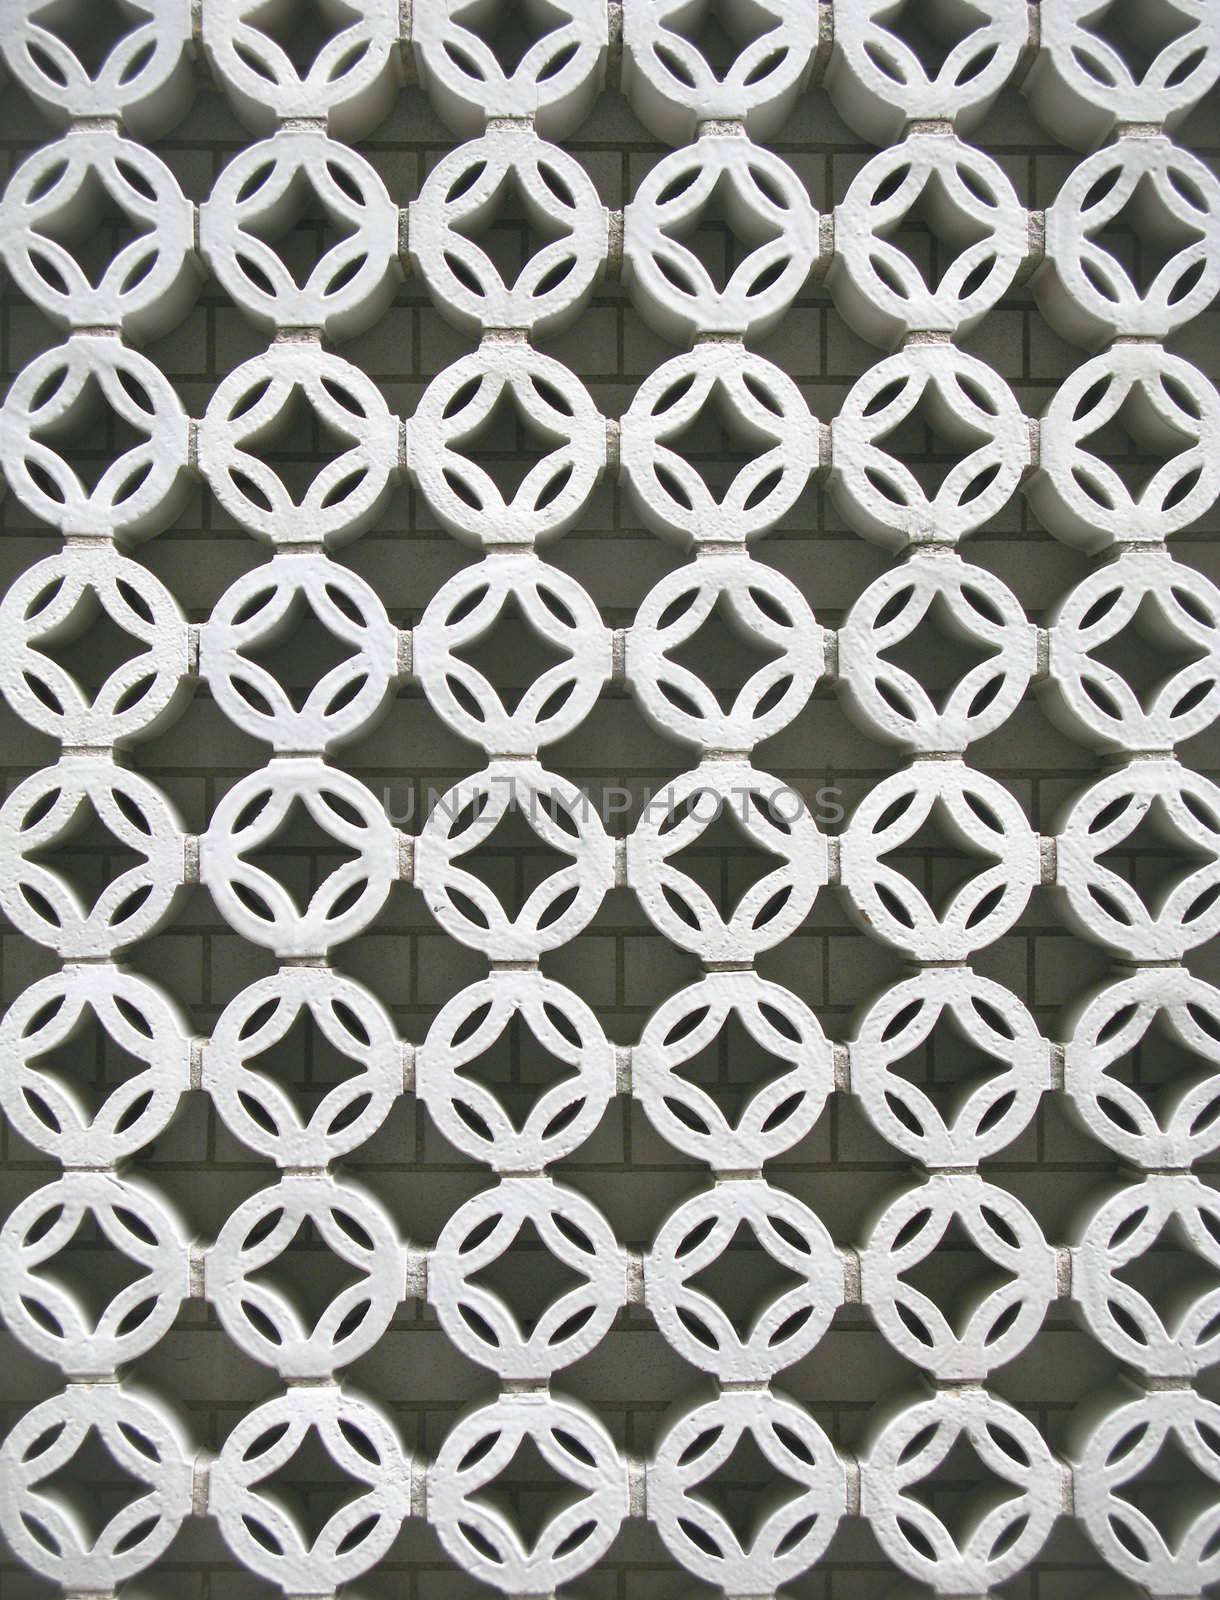 Lattice on side of building in white circular pattern